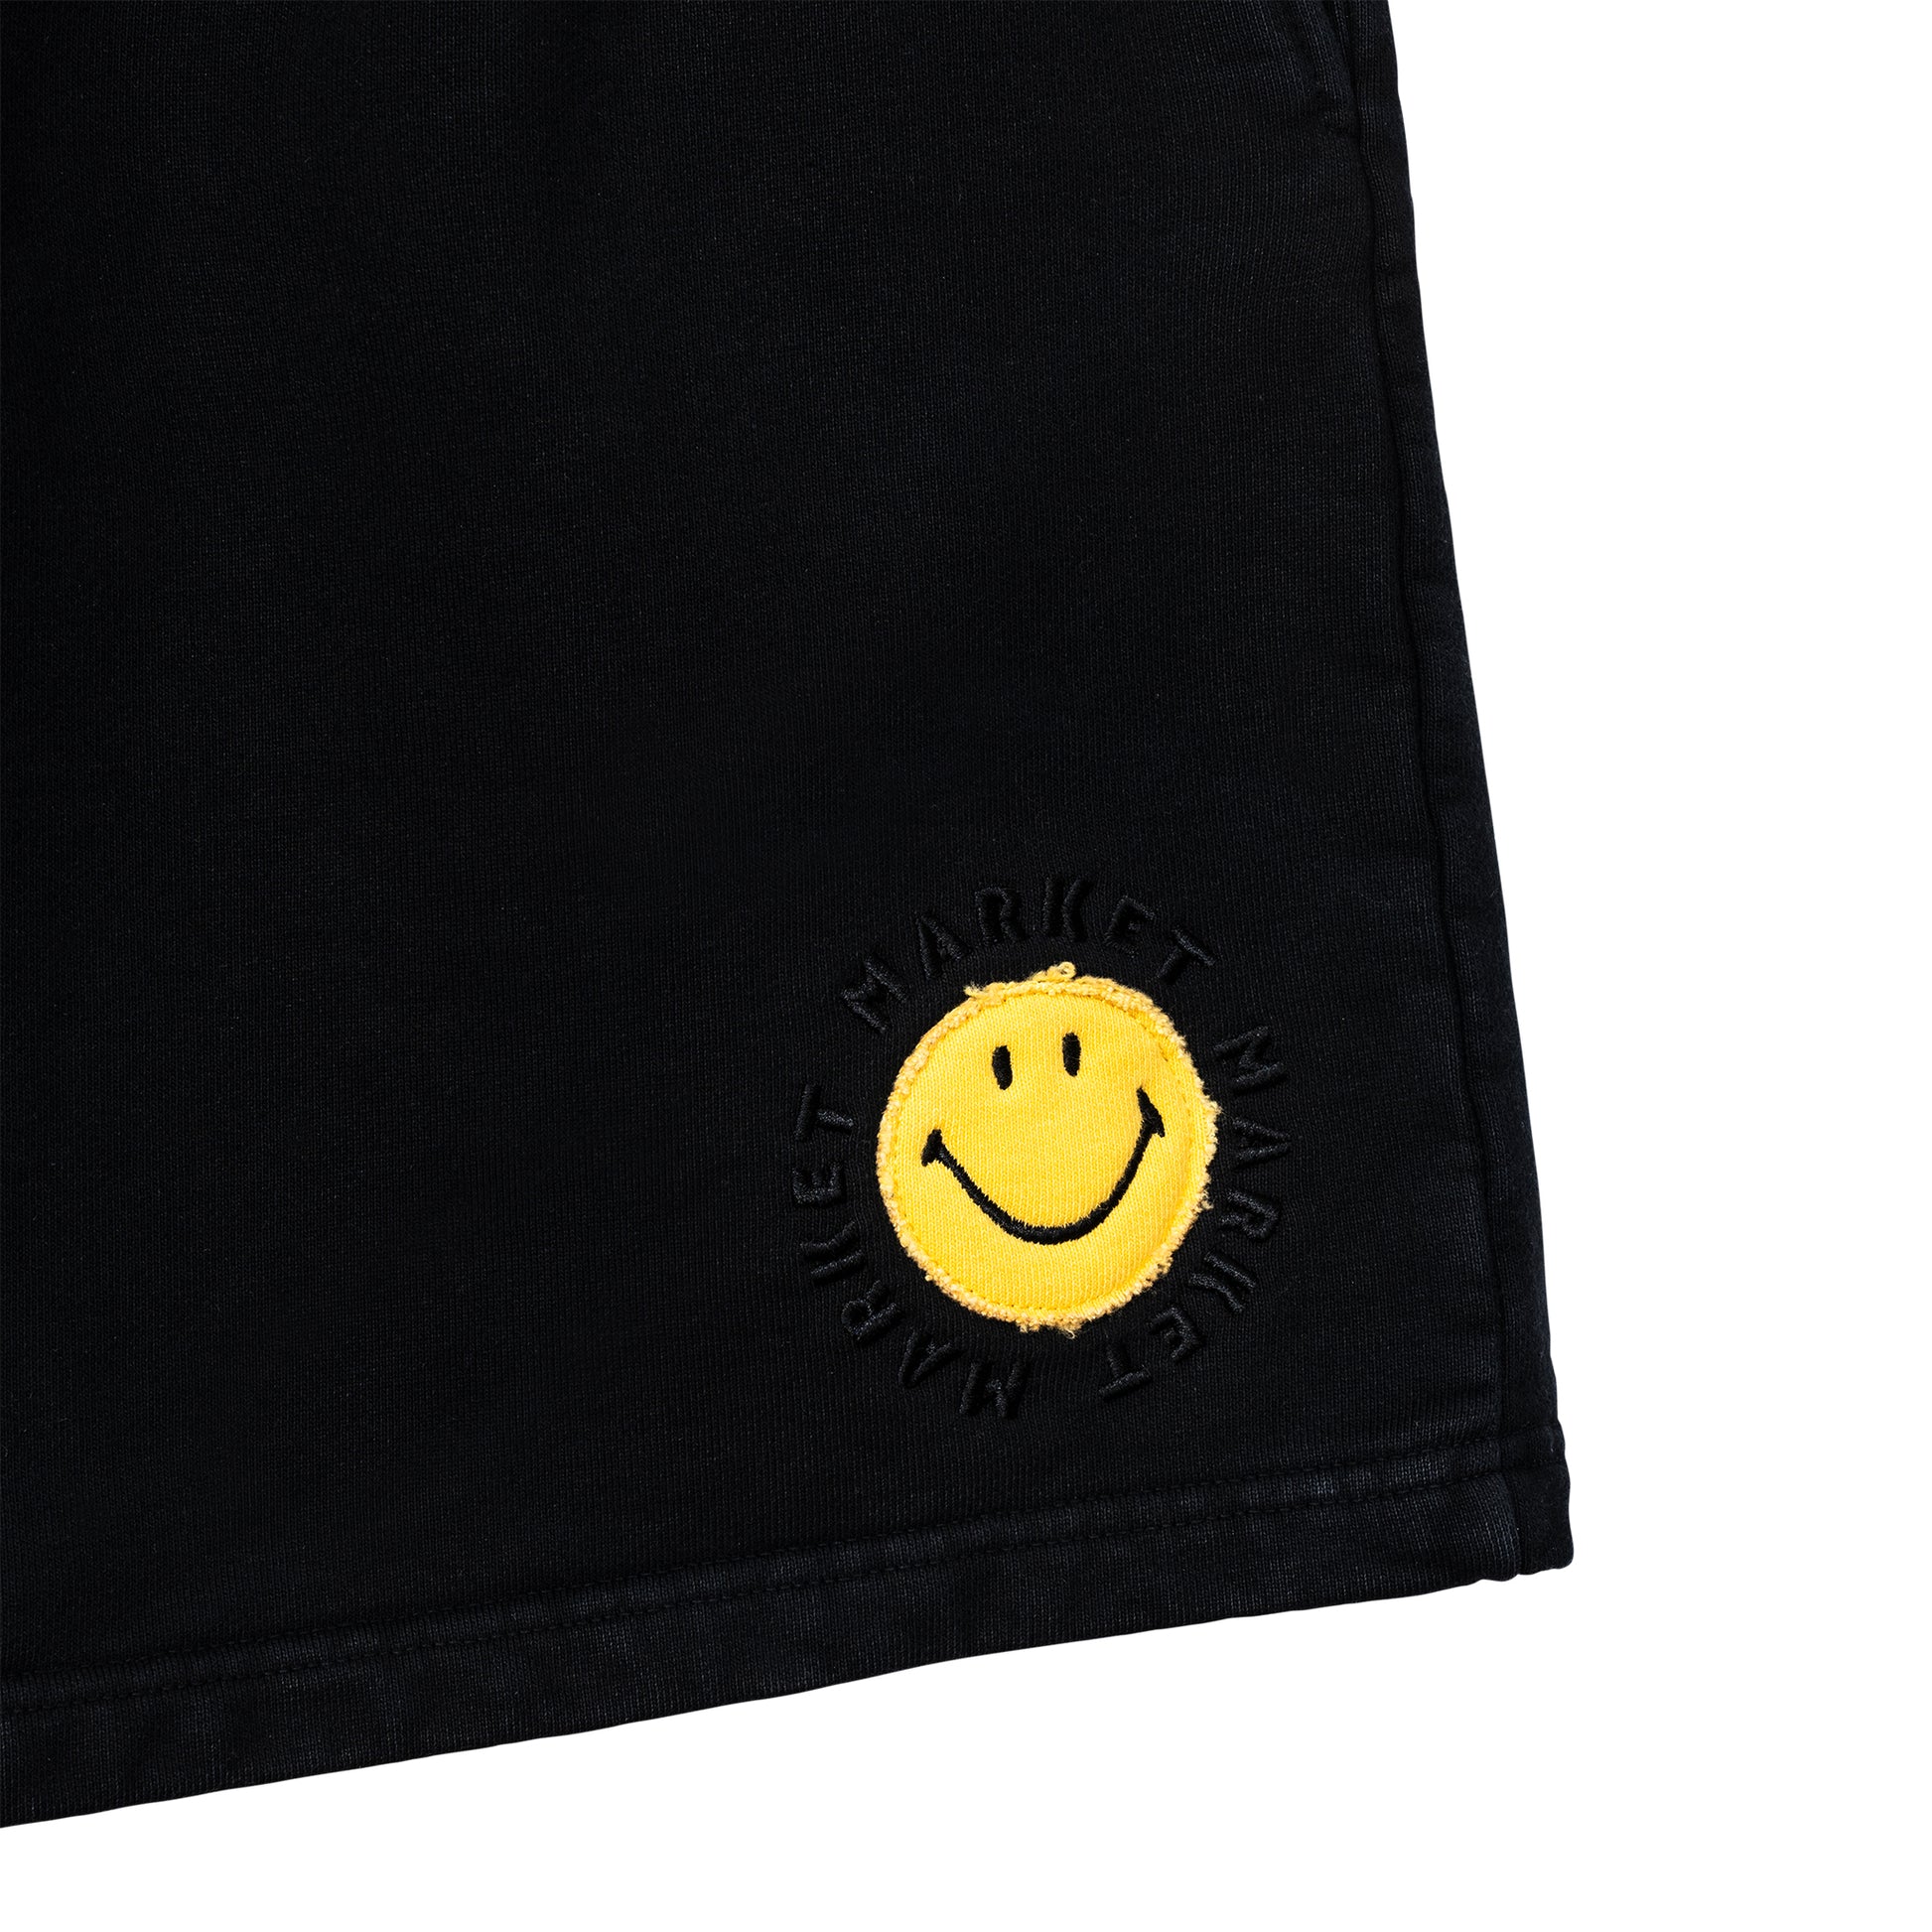 MARKET clothing brand SMILEY VINTAGE SWEATSHORTS. Find more graphic tees, sweatpants, shorts and more bottoms at MarketStudios.com. Formally Chinatown Market. 